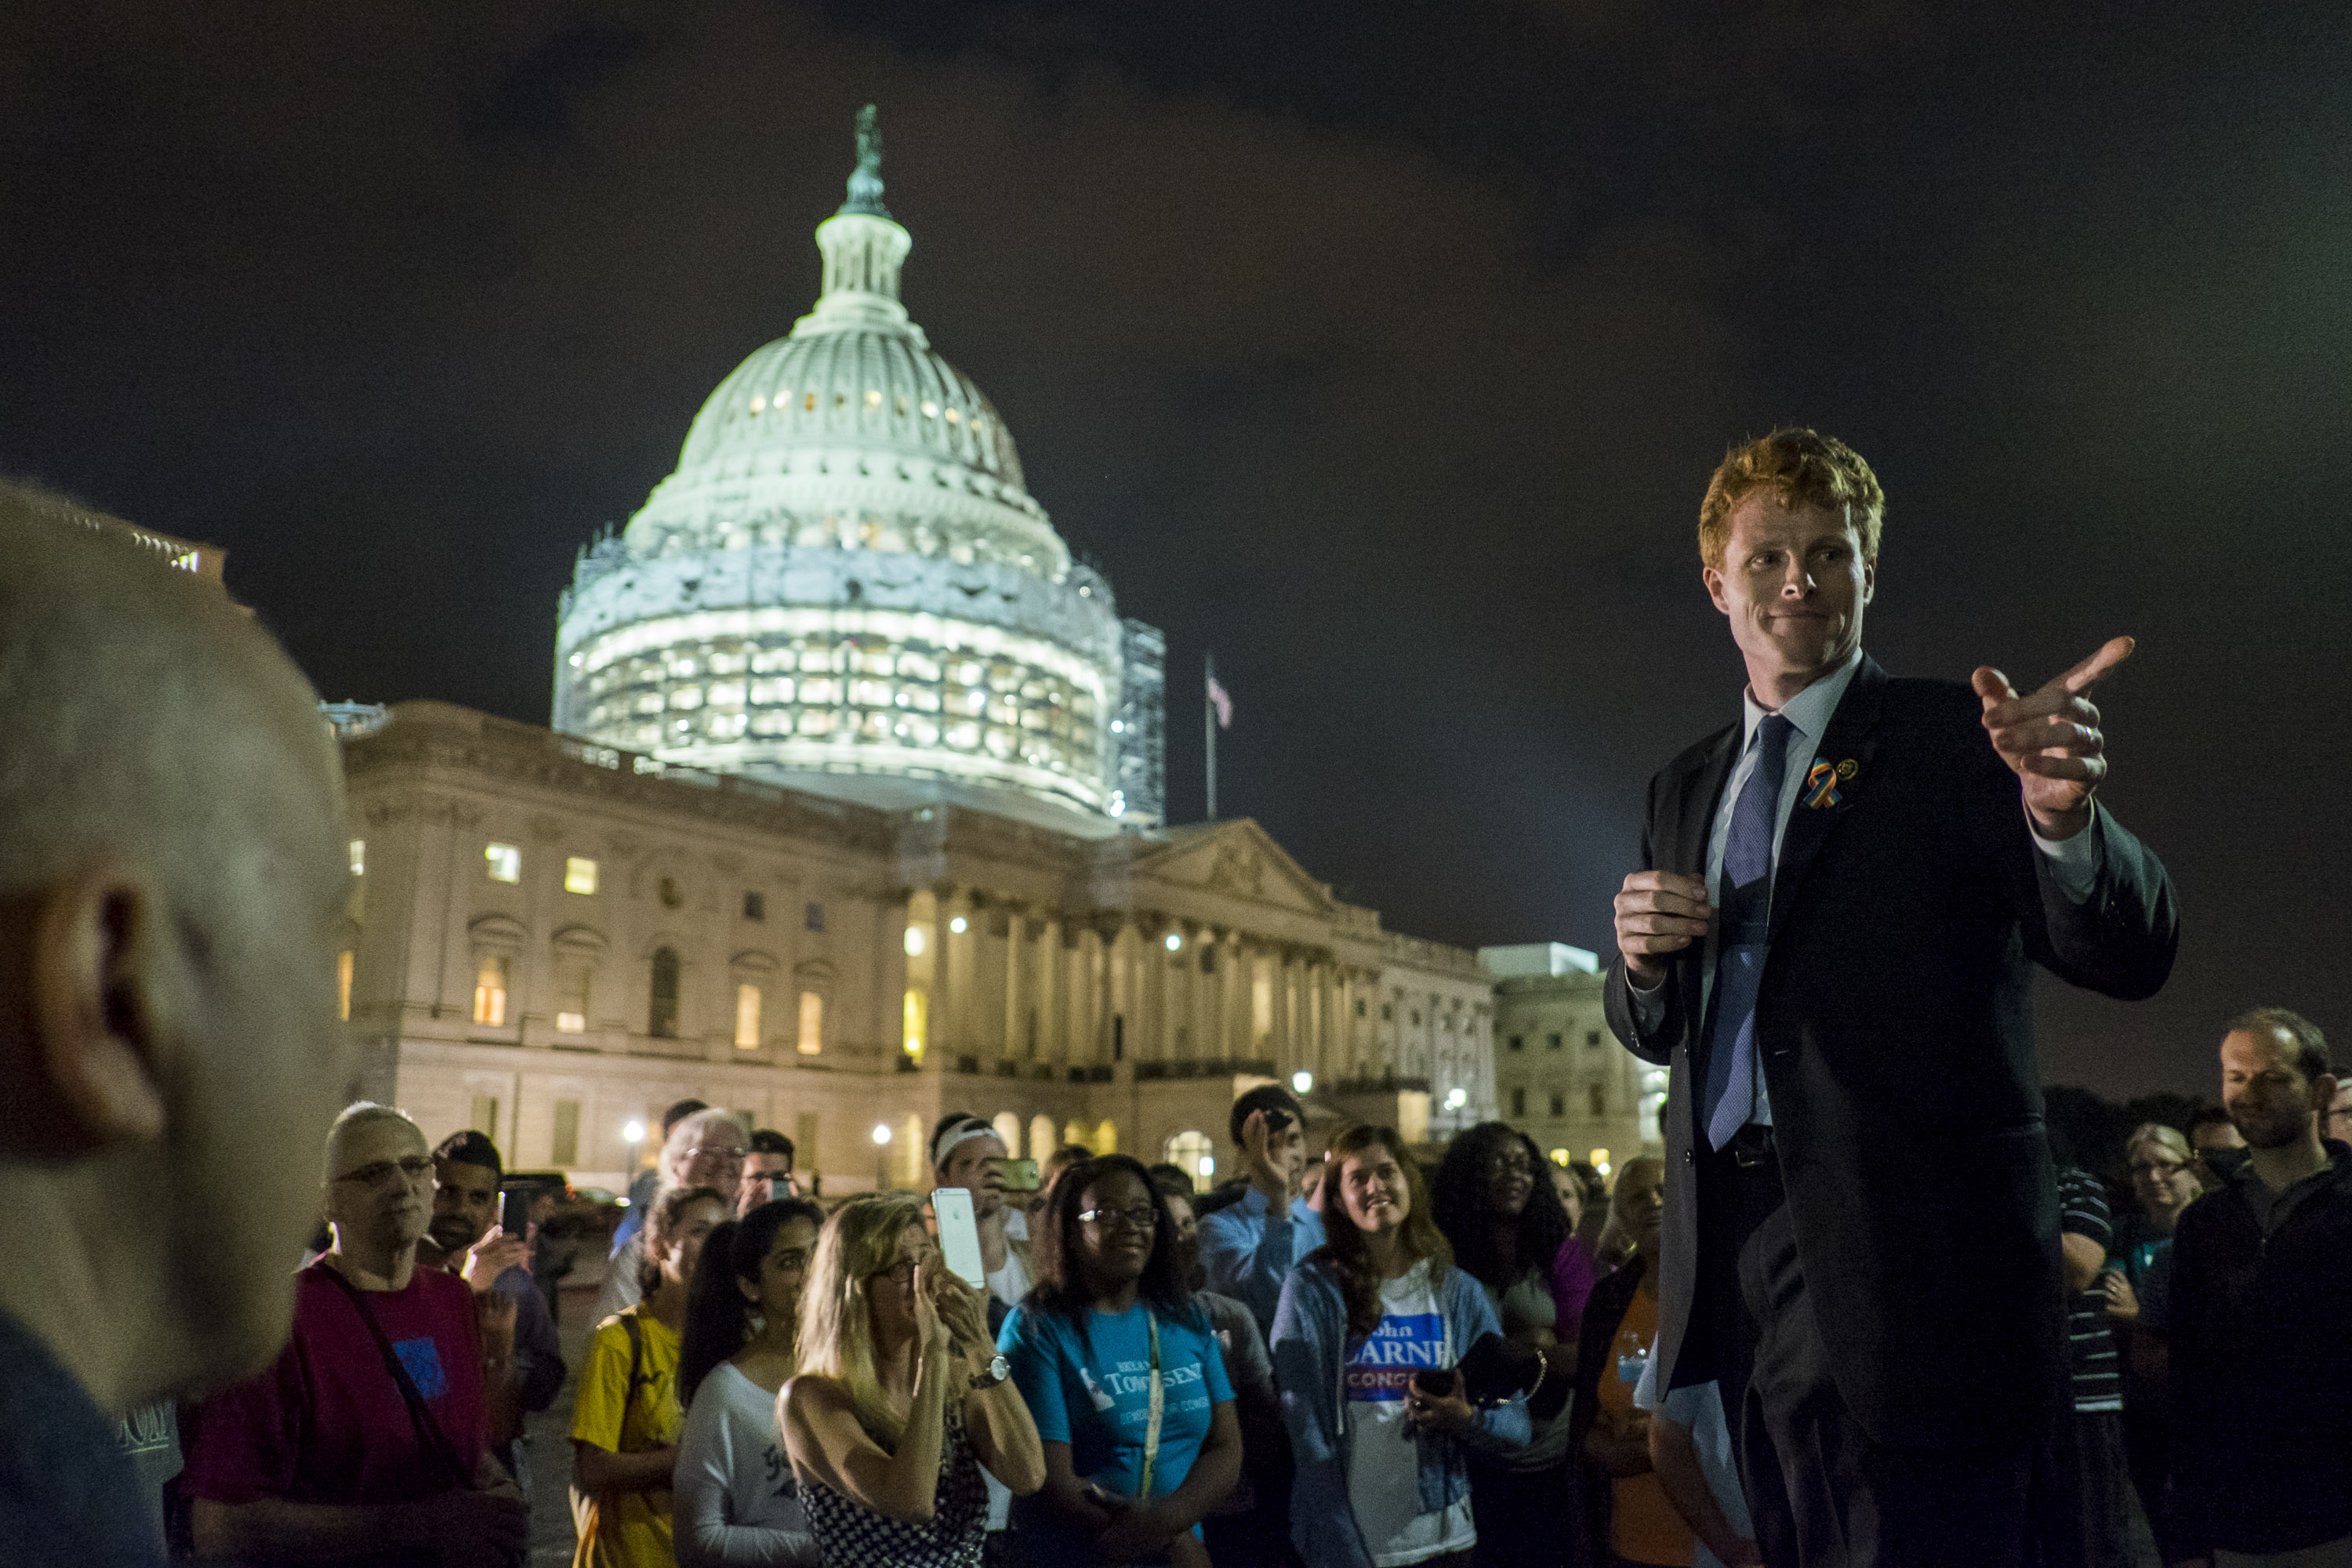 WASHINGTON, DC - June 23: Rep. Joe Kennedy III (D-MA) speaks to supporters of House Democrats taking part in a sit-in on the House Chamber outside the U.S. Capitol on June 23, 2016 in Washington, DC. House Republicans attempted to end the 16-hour sit-in by Democrats early Thursday morning by adjourning for a recess through July 5. (Photo by Pete Marovich/Getty Images)